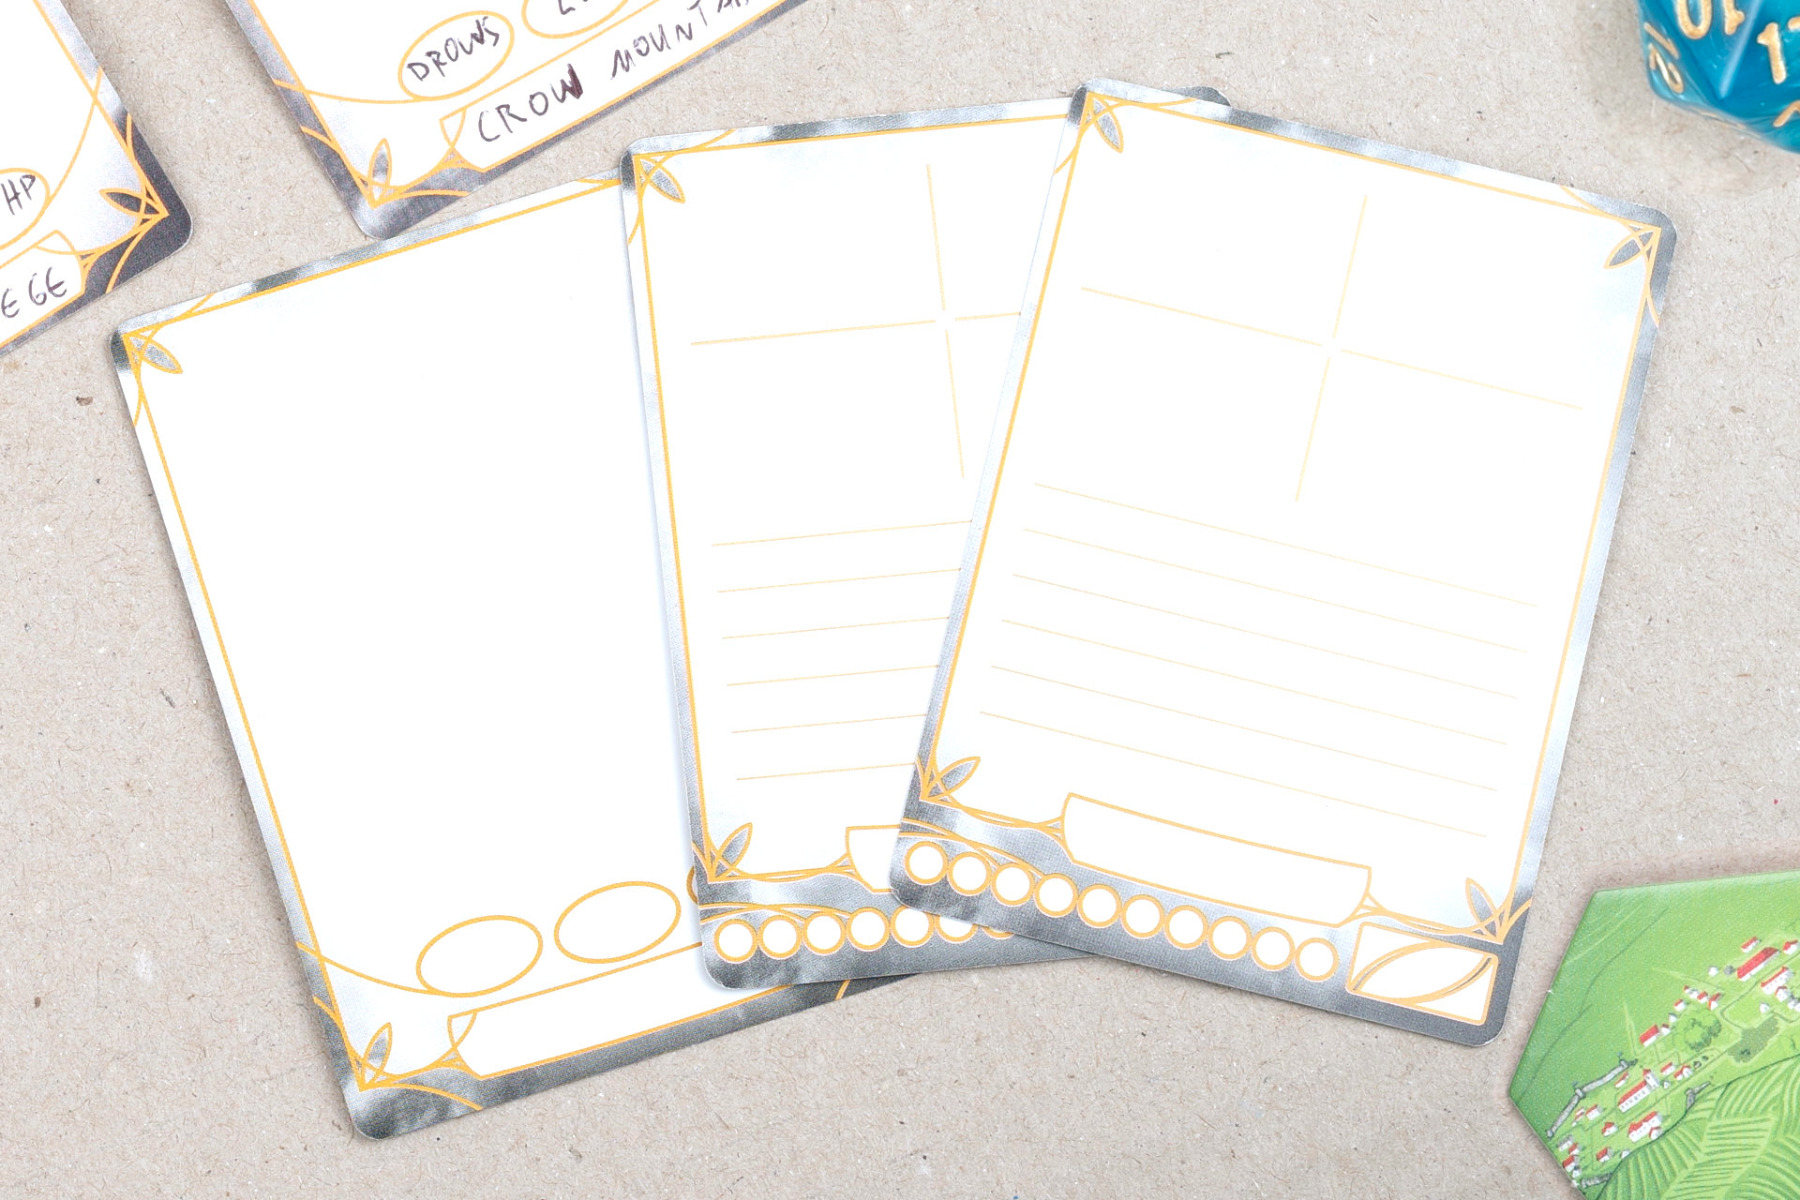 Blank cards for RPG